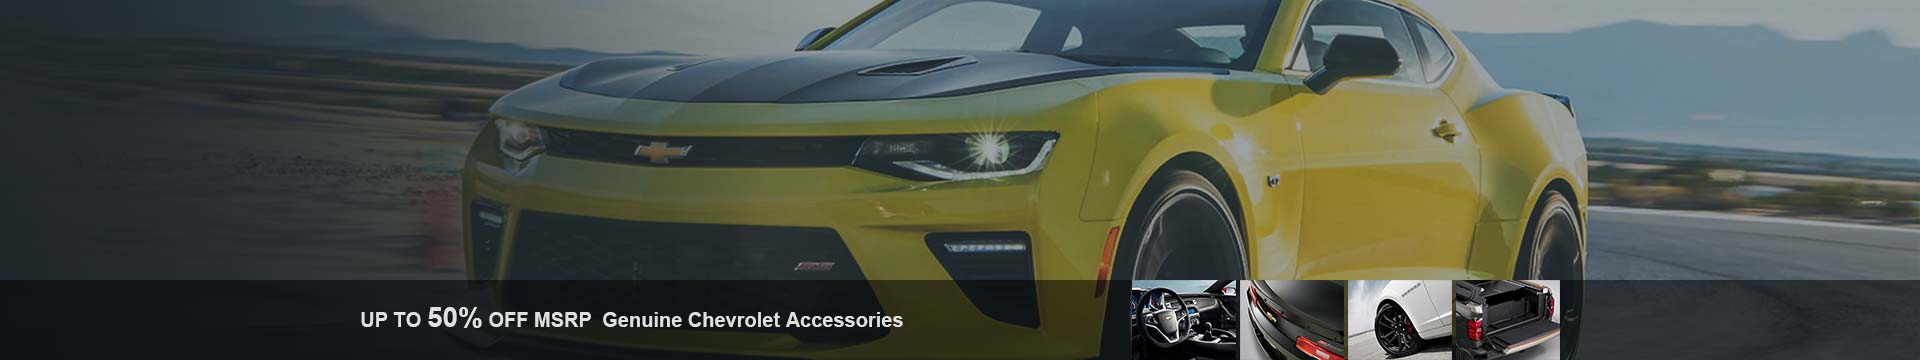 Shop Chevrolet HHR accessories with lowest prices